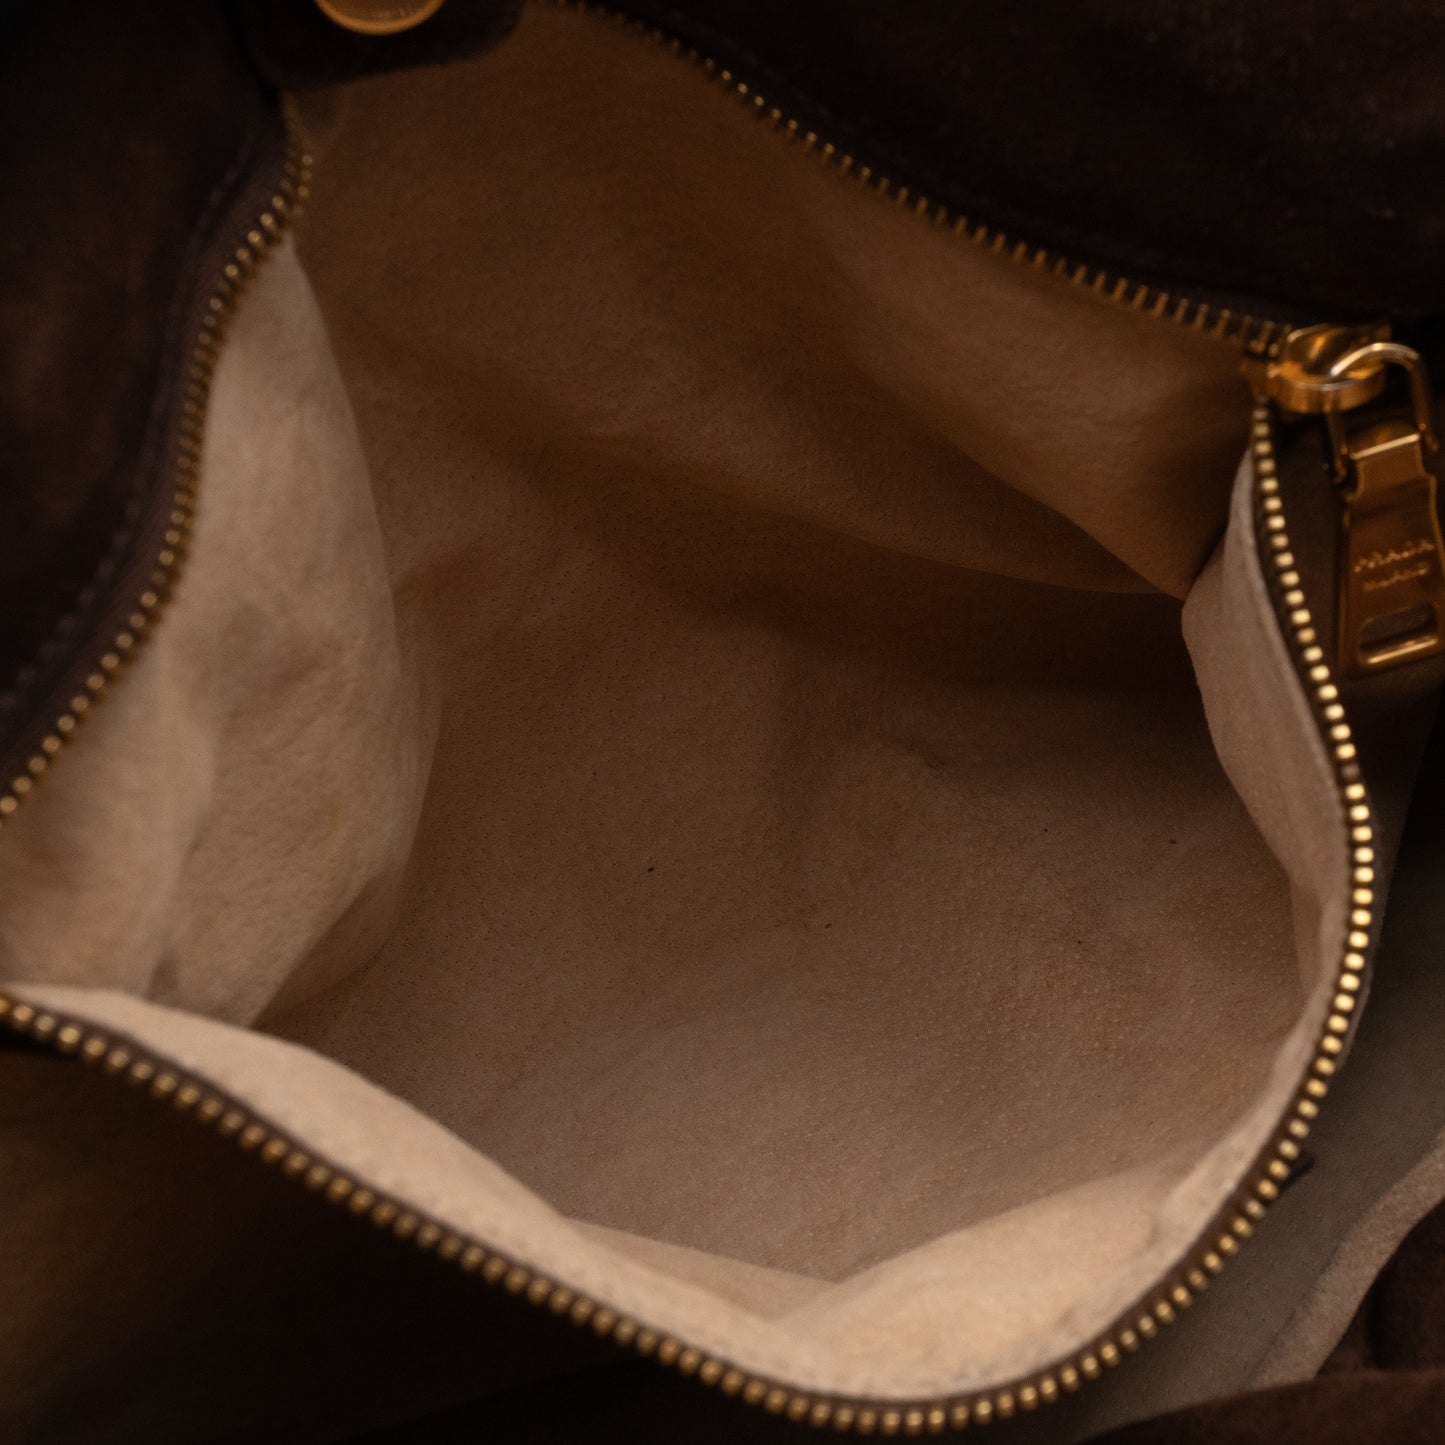 Bowling Bag Brown Suede Leather